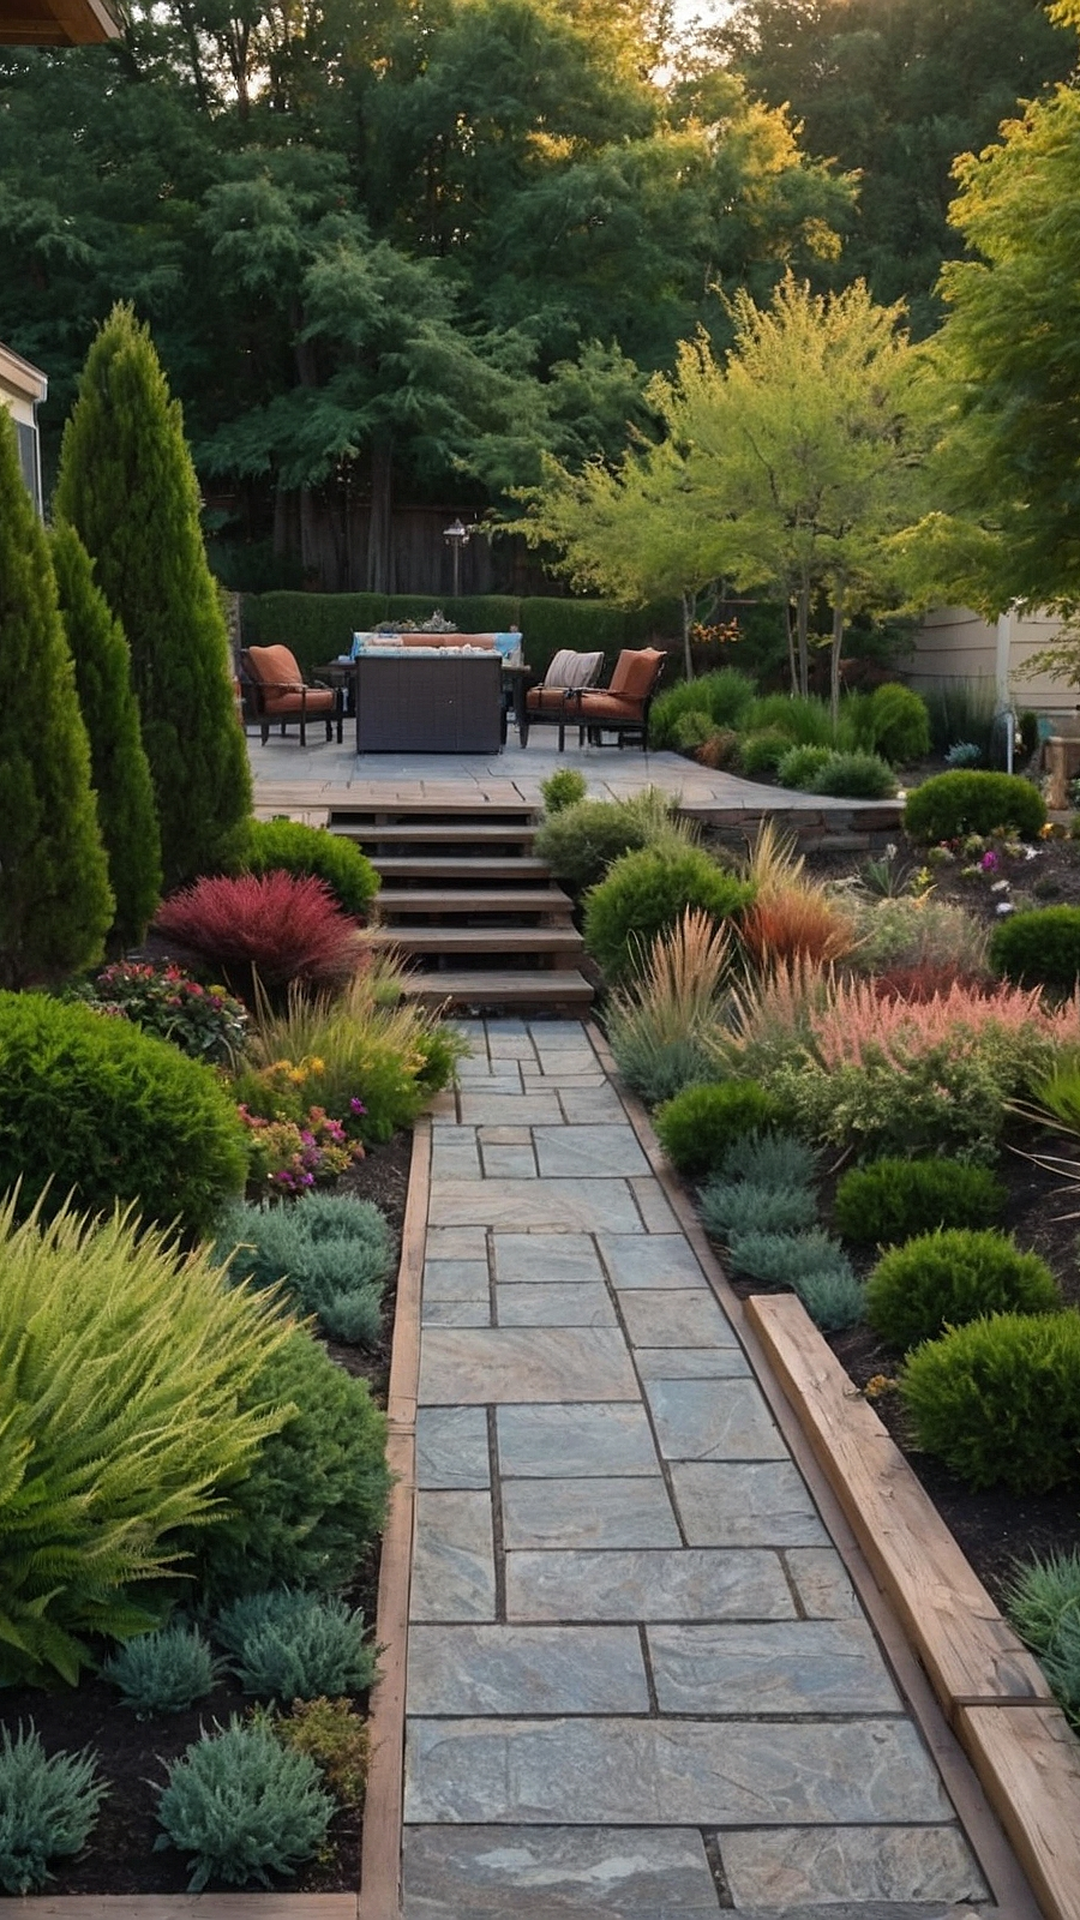 The Art of Landscaping: Techniques for Beautifying Your Outdoor Space